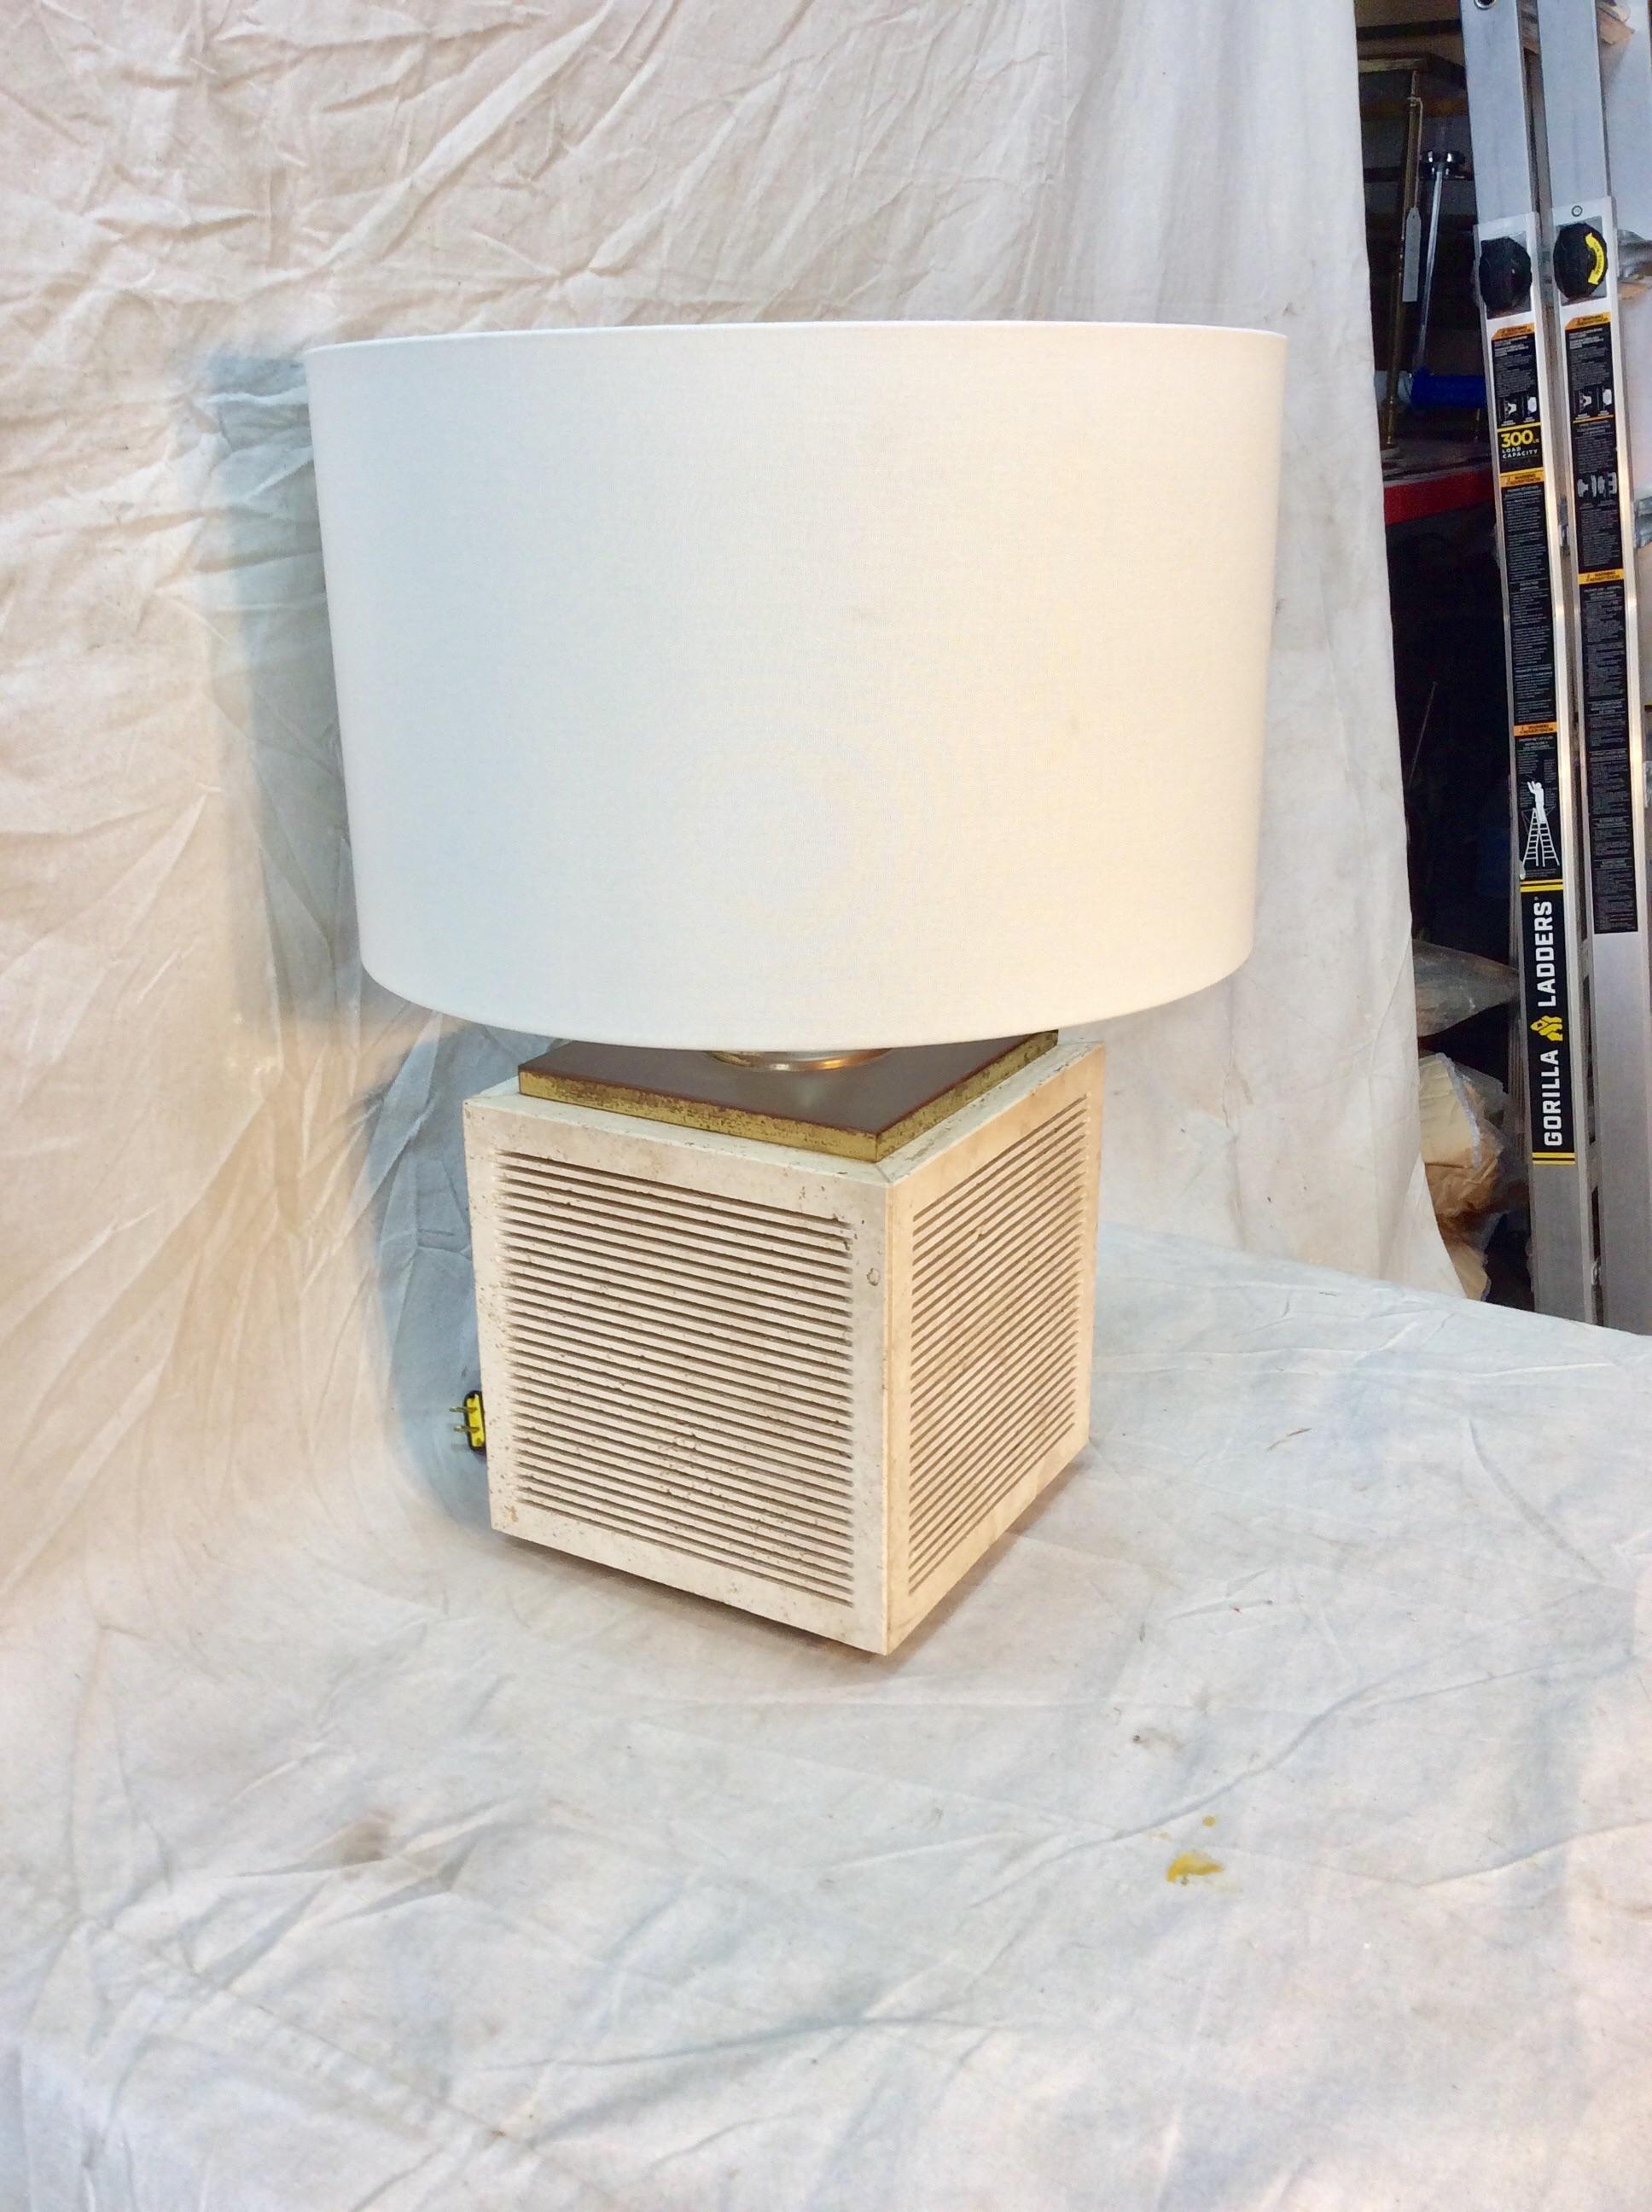 This highly collectable Mid-Century Modern Italian Table Lamp features a travertine cubic base and brass structure. The lamp is constructed with a three way switch to illuminate the base, the lamp and both the base and lamp. Attributed to Fratellli